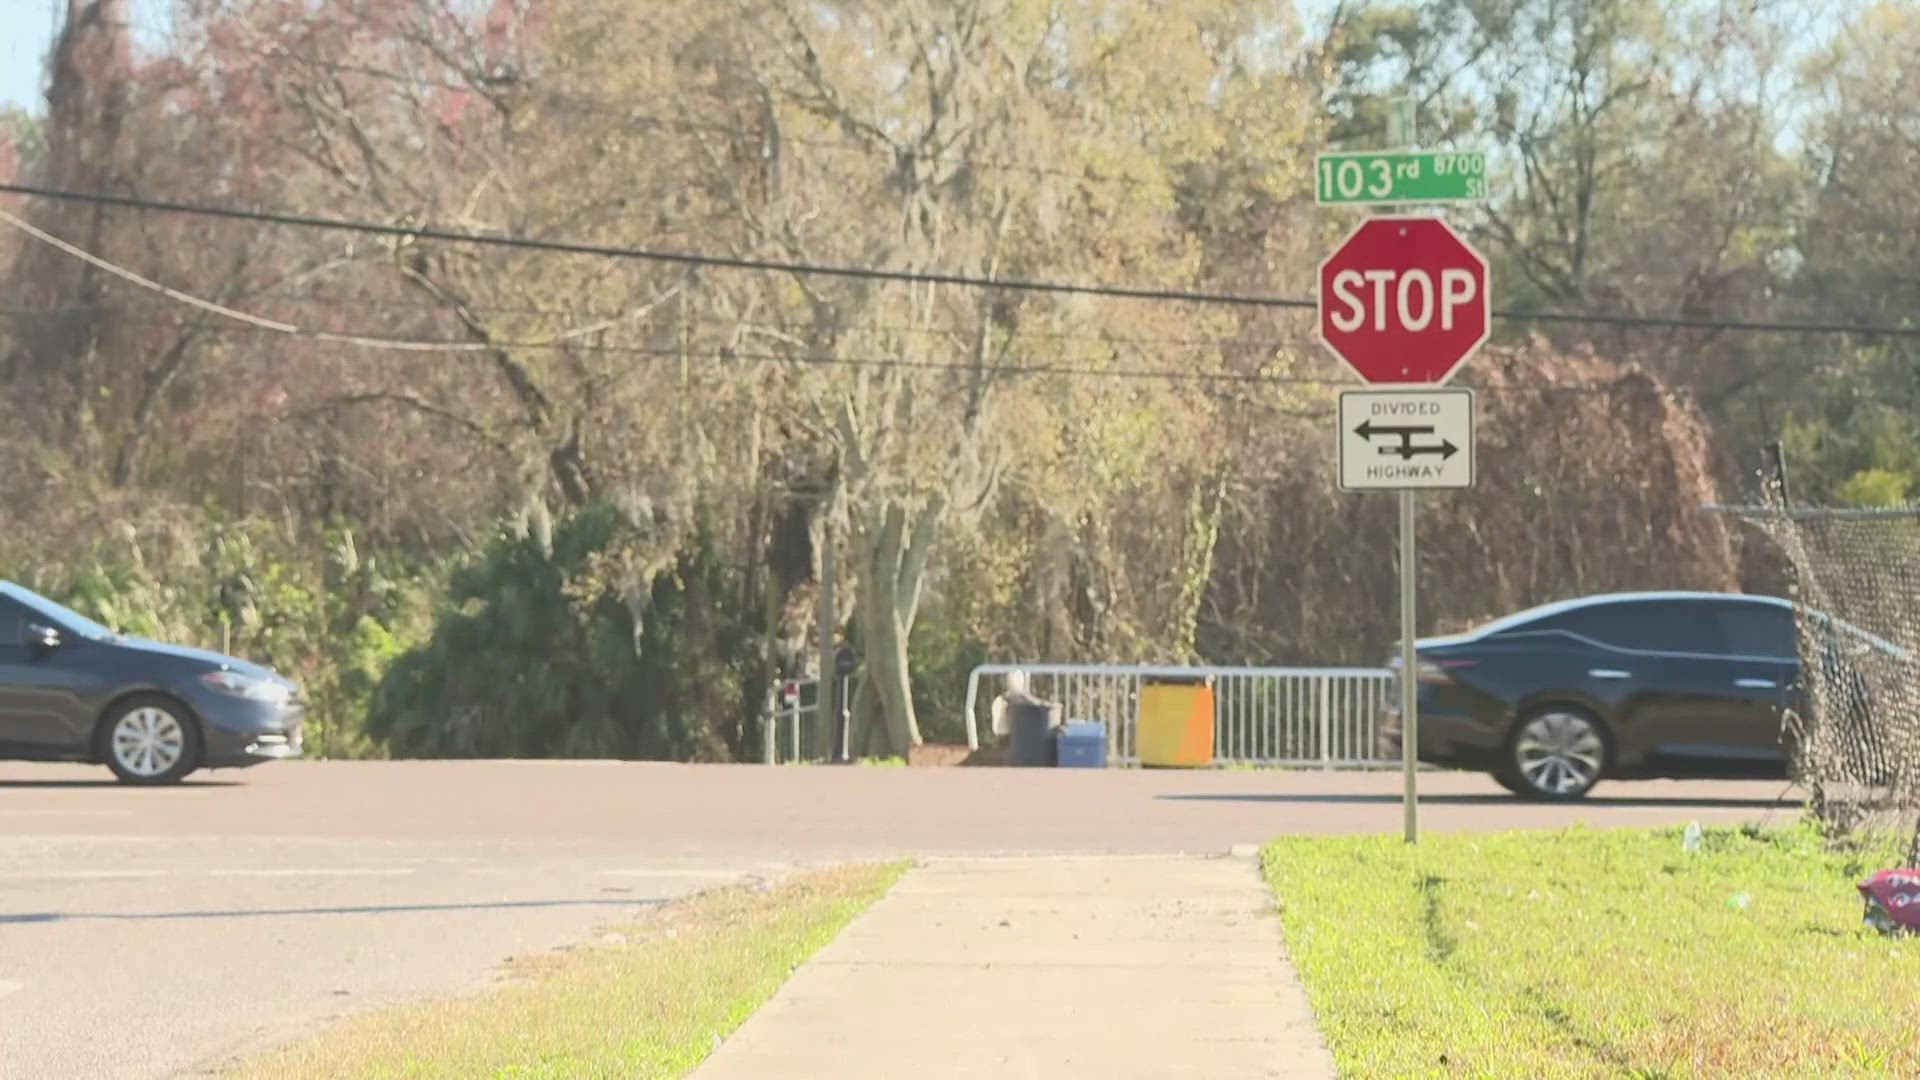 A United States Postal Worker was killed in a crash on 103rd Street while trying to turn onto Lambing Road in Jacksonville on Tuesday.